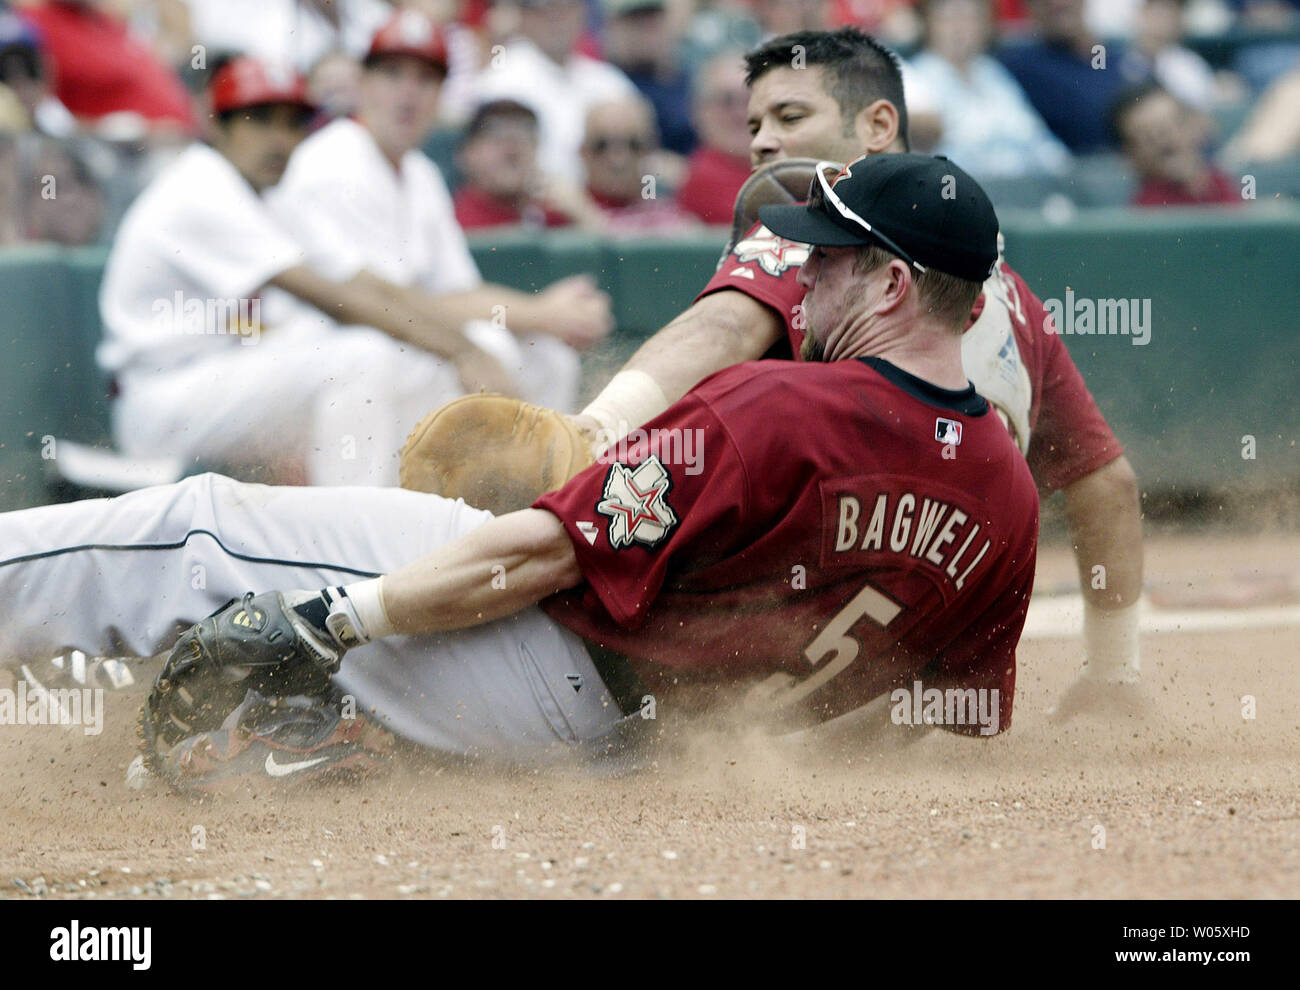 Houston Astros Jeff Bagwell (5) and catcher Raul Chavez make a sliding attempt on a foul ball hit by St. Louis CardInals Edgar Renteria in the fifth inning at Busch Stadium in St. Louis on June 6, 2004. The ball fell just short of Bagwell's glove.  (UPI Photo/Bill Greenblatt) Stock Photo